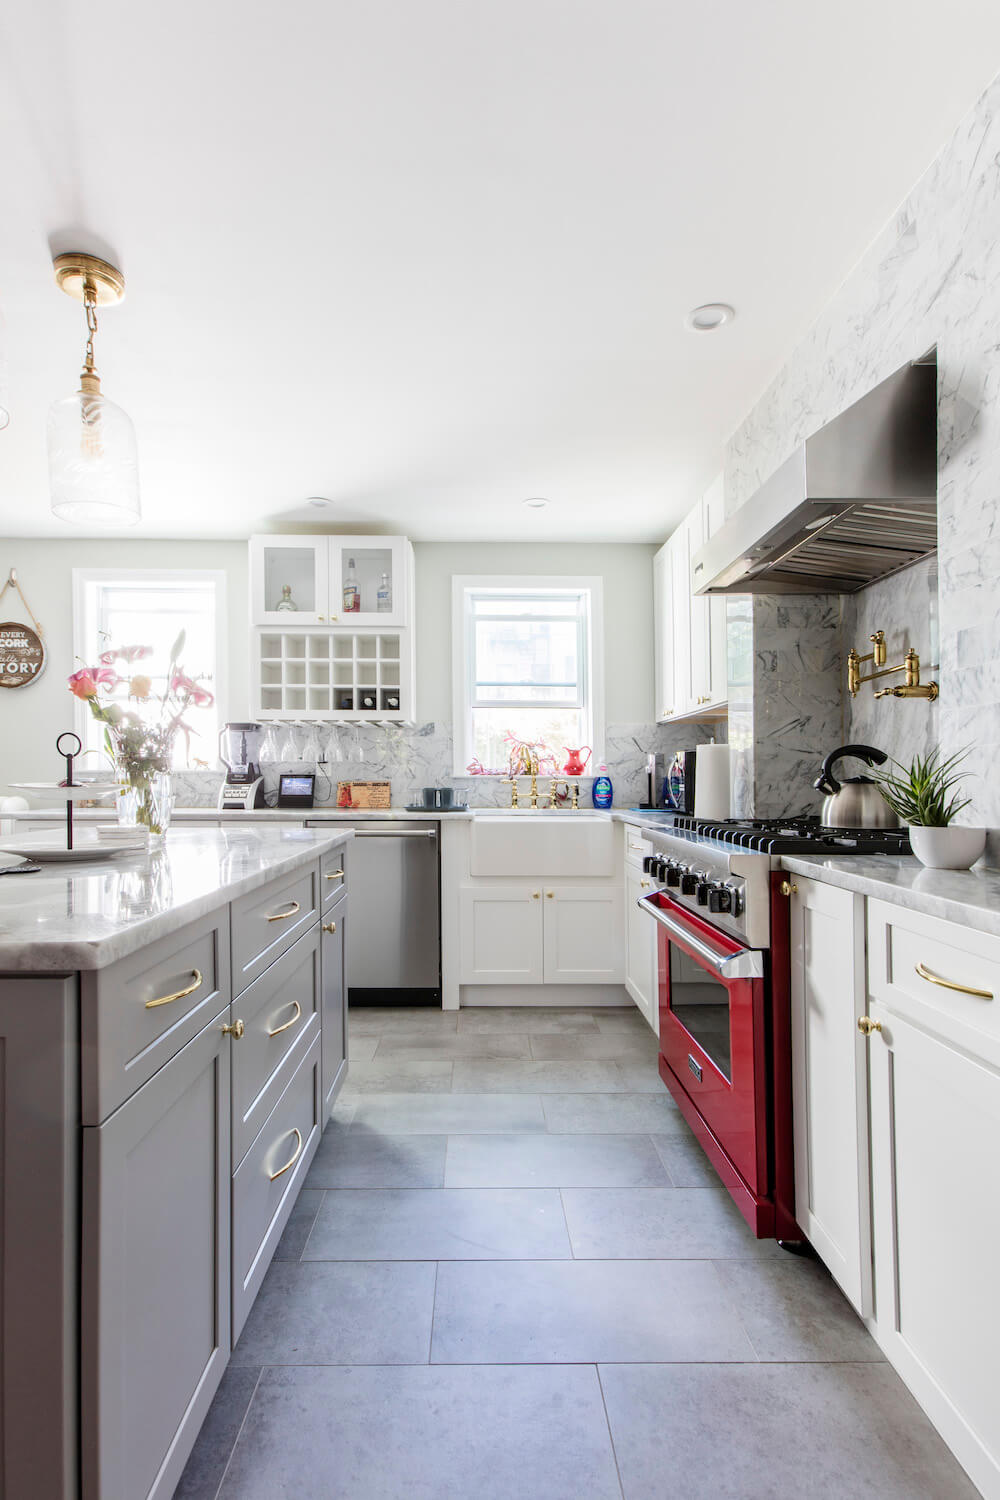 White kitchen with kitchen island and bright red cooking range over light gray floor tile after renovation